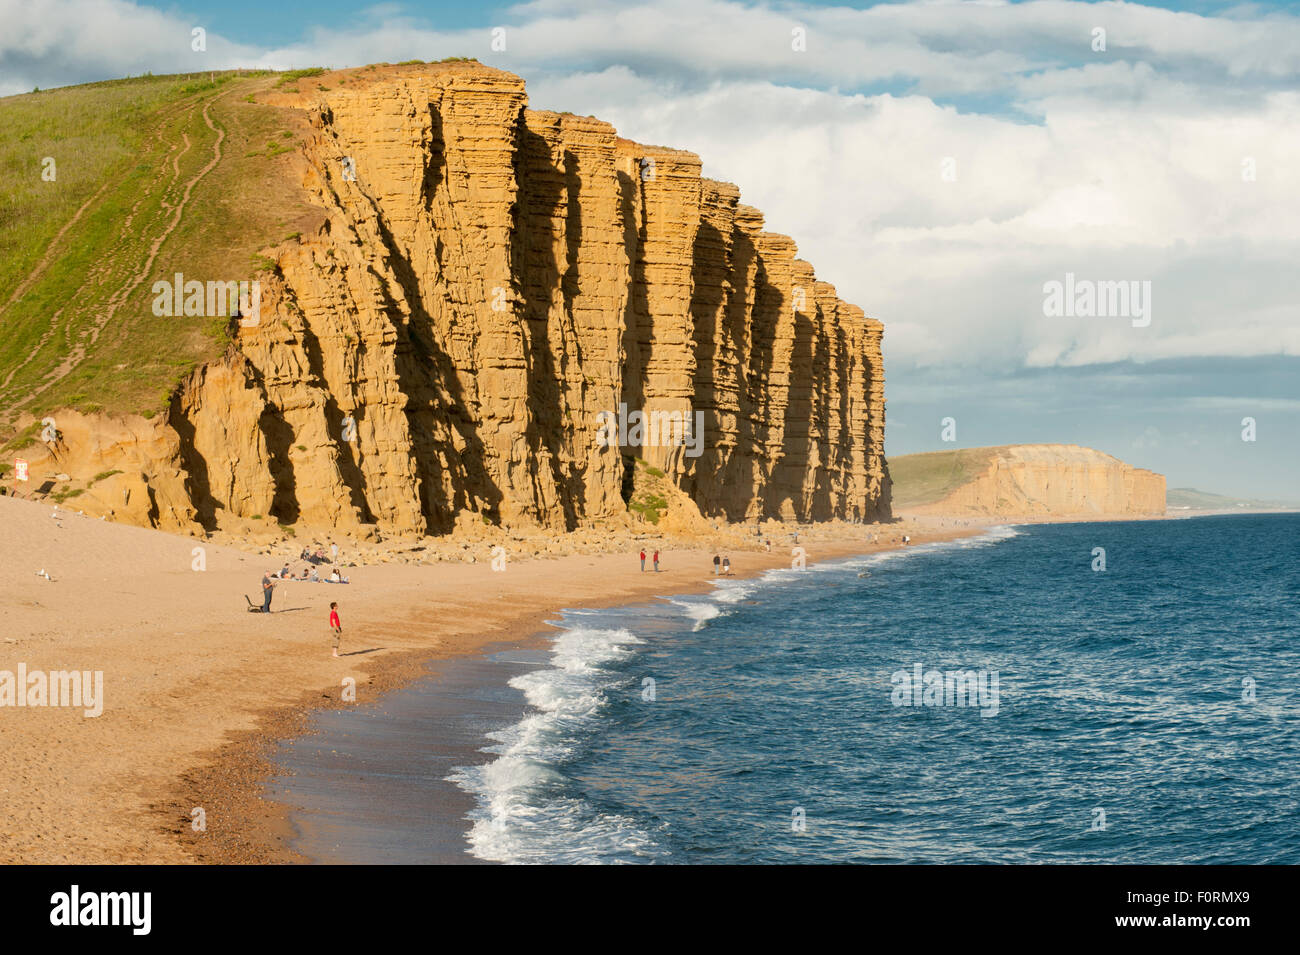 The cliffs of the 'Jurassic Coast' to the east of West Bay near the town of Bridport, Dorset, England, UK. Stock Photo